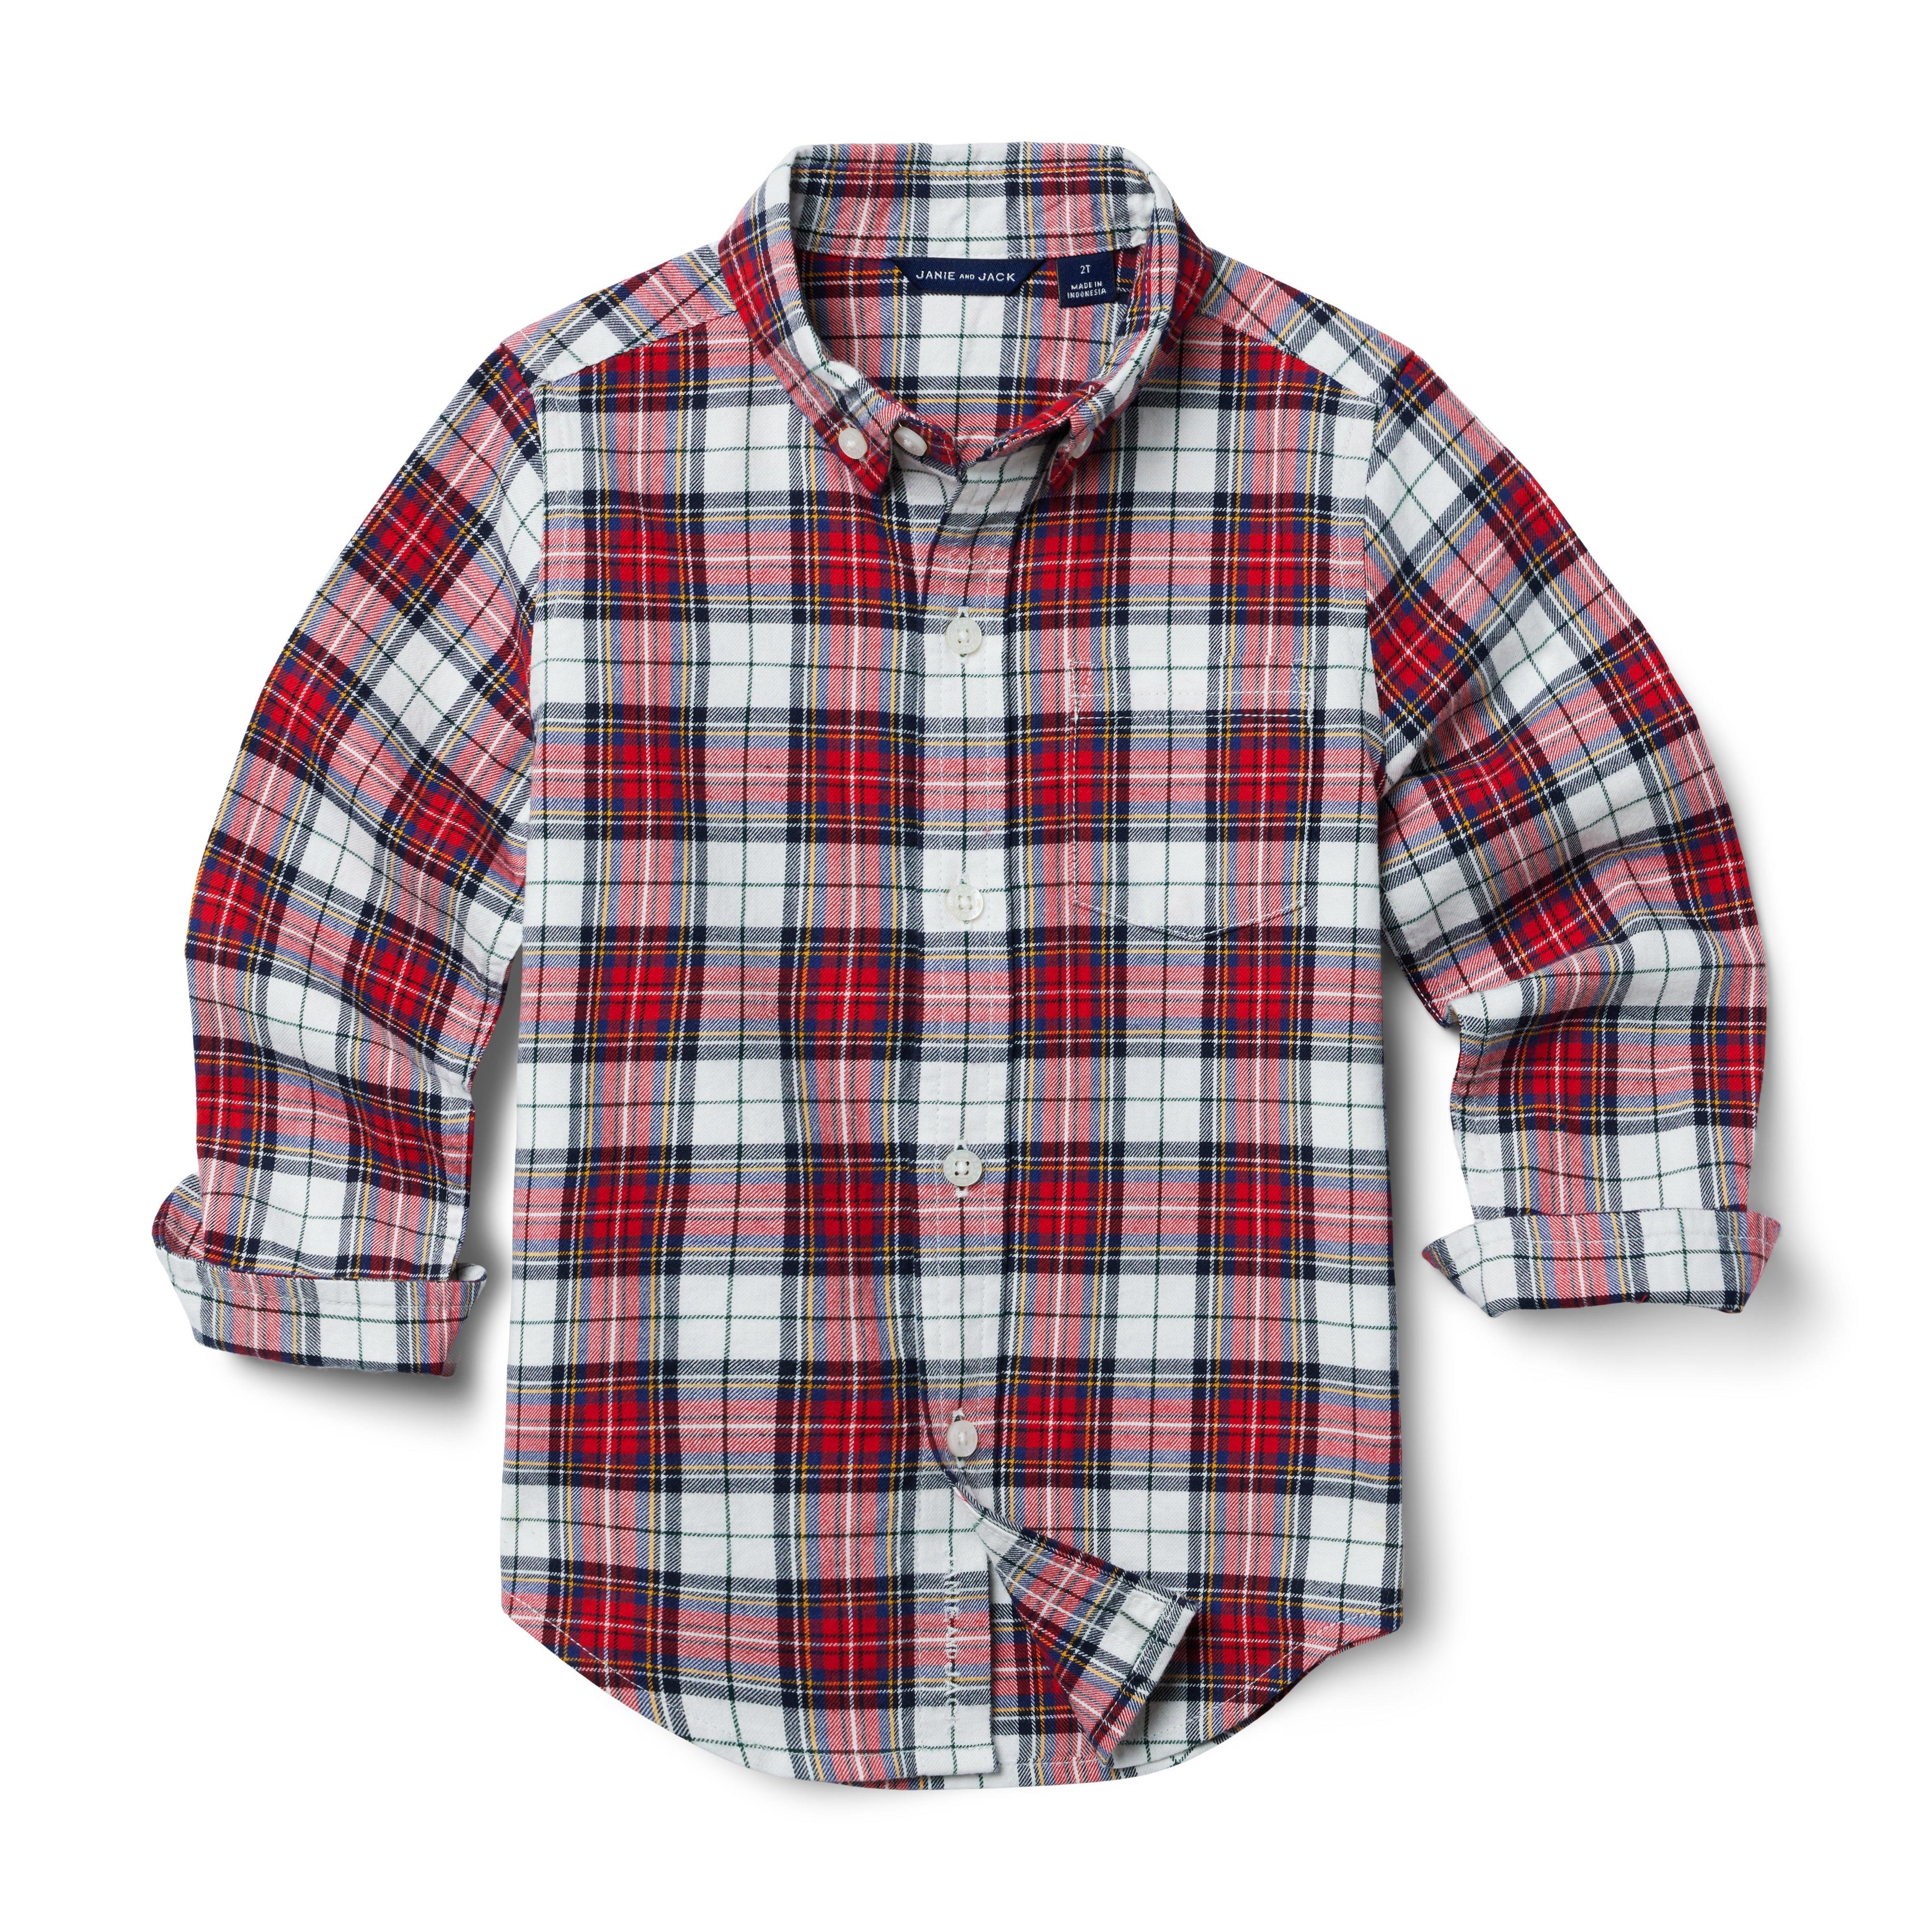 Boys Button-Up Shirts at Janie and Jack